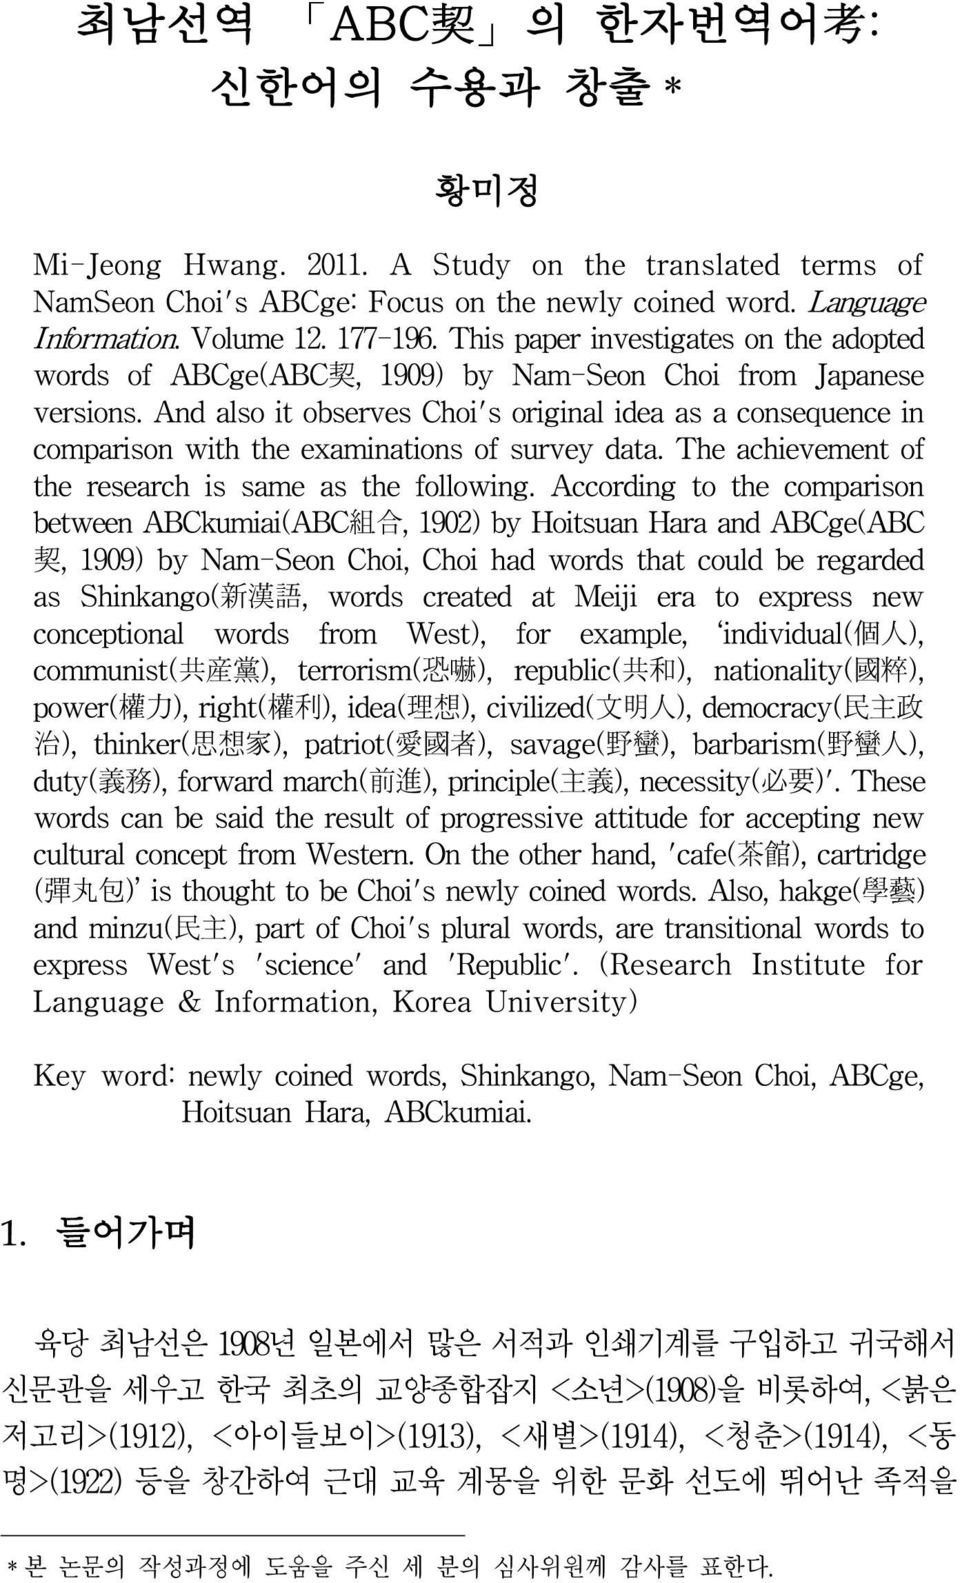 And also it observes Choi's original idea as a consequence in comparison with the examinations of survey data. The achievement of the research is same as the following.